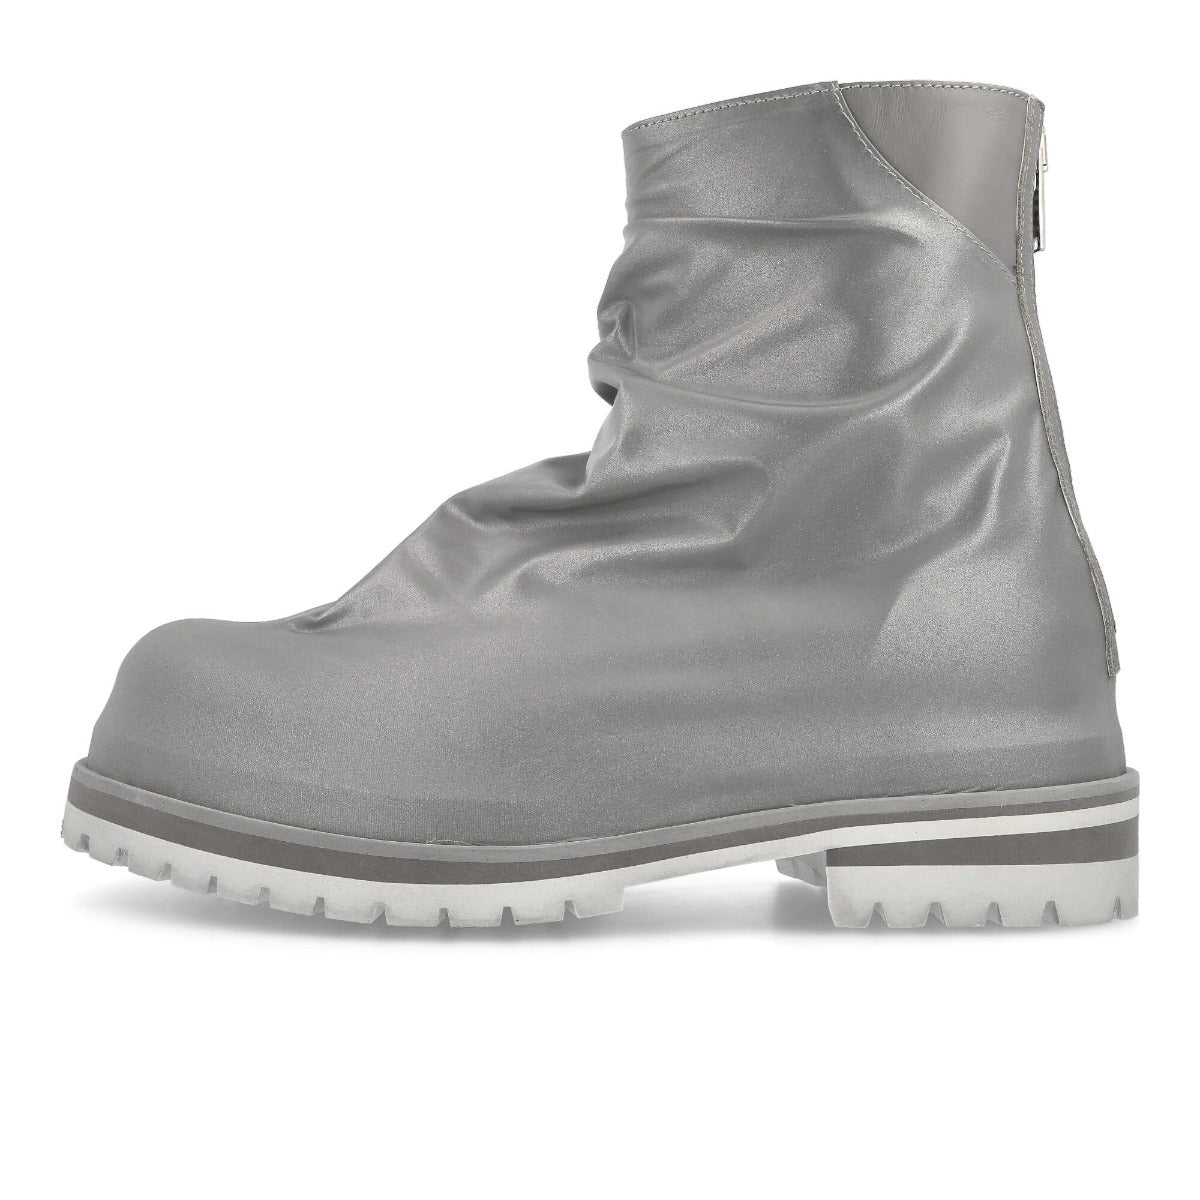 Reflective Boots